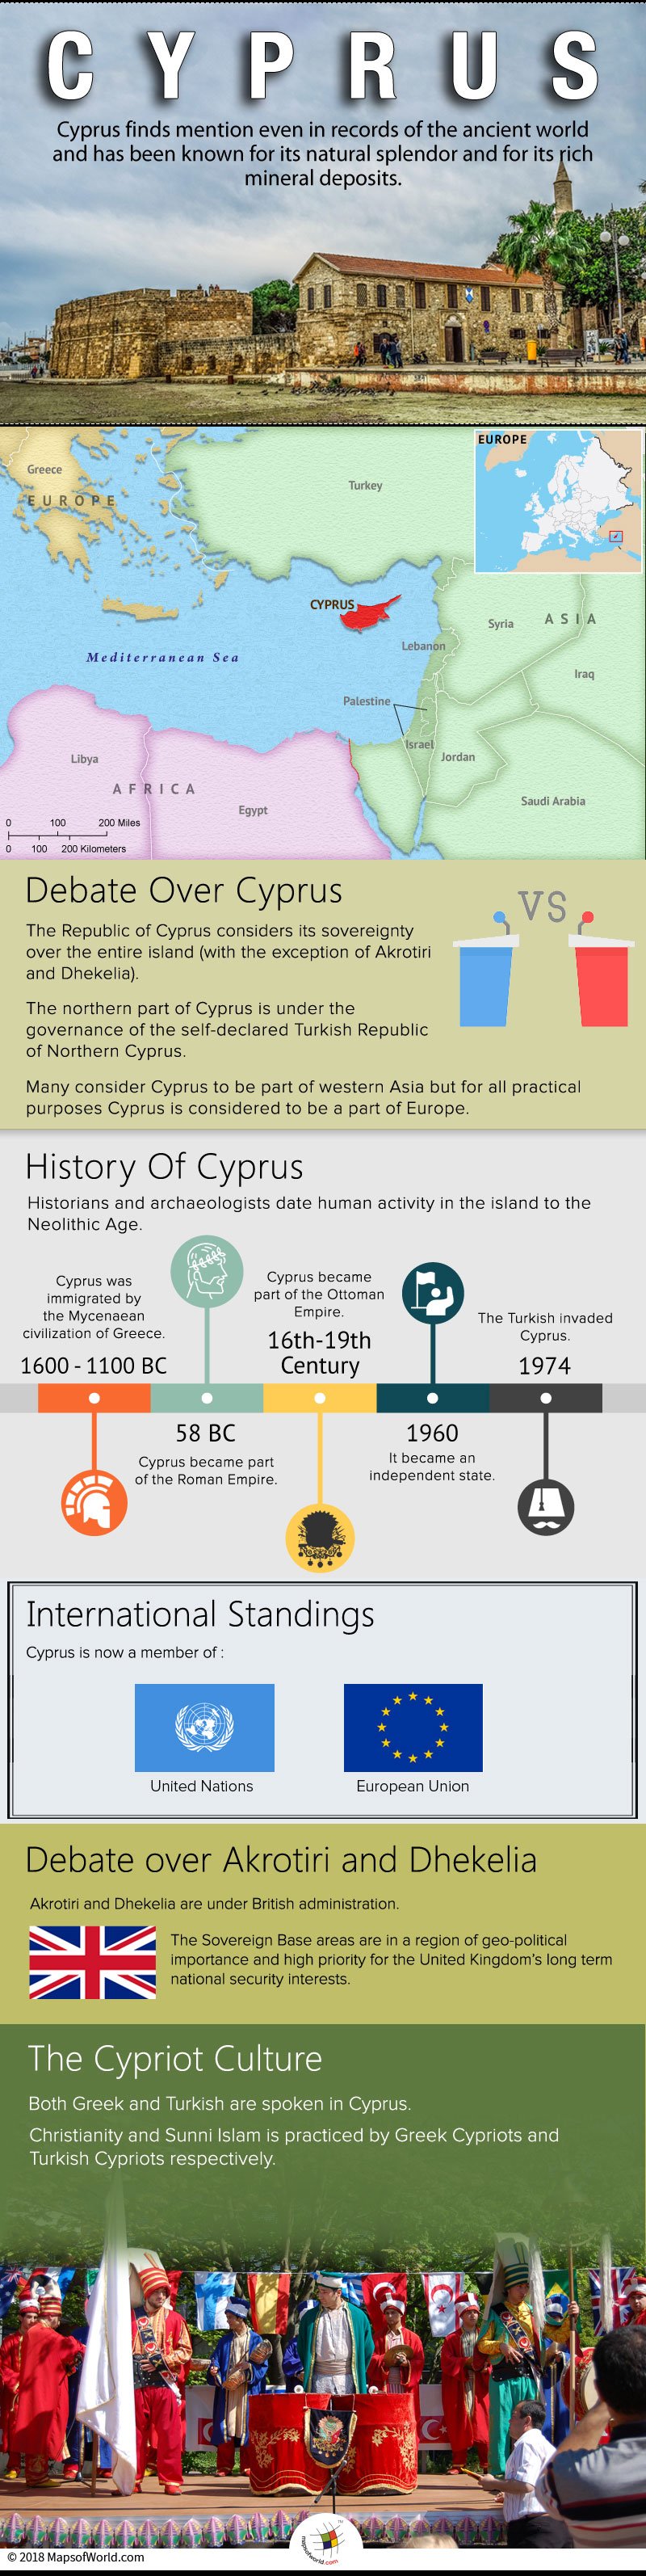 Infographic elaborating details about Cyprus